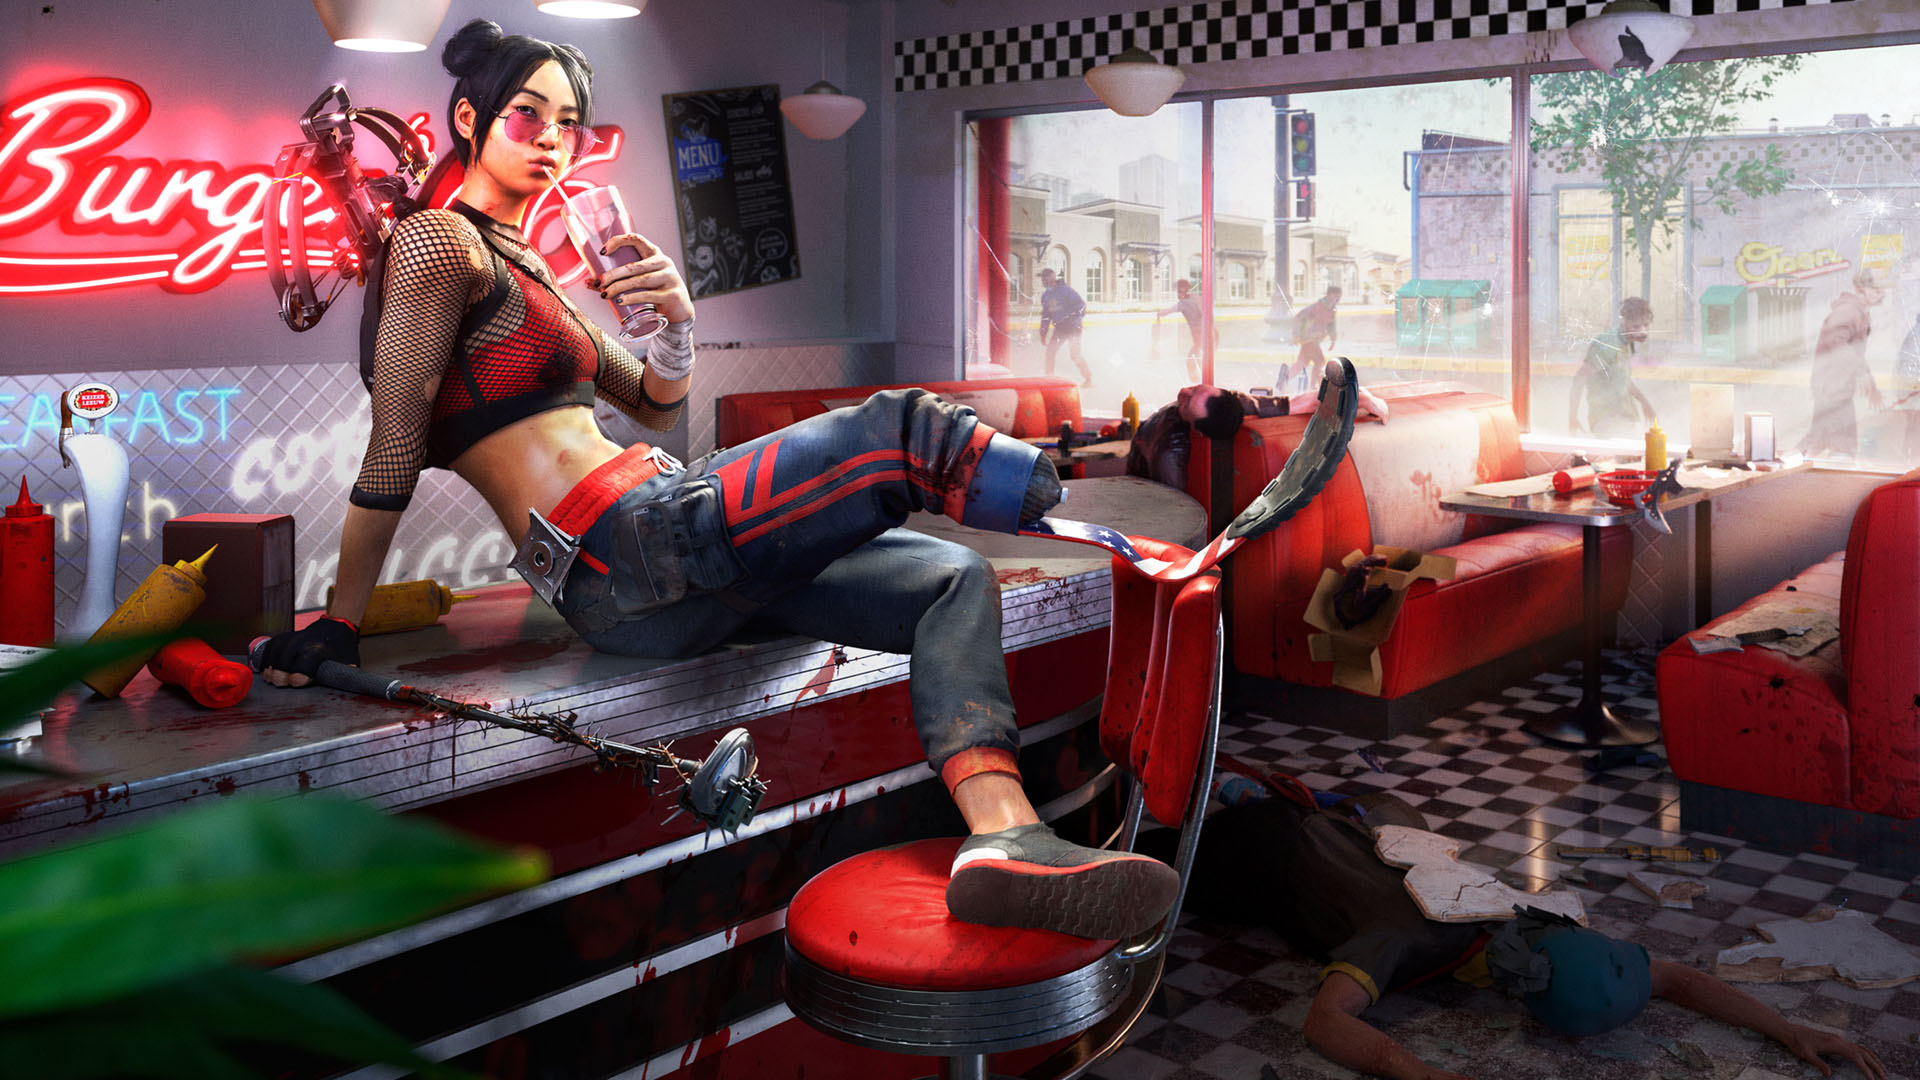 Dead Island 2 sells over 1 million copies in first 3 days